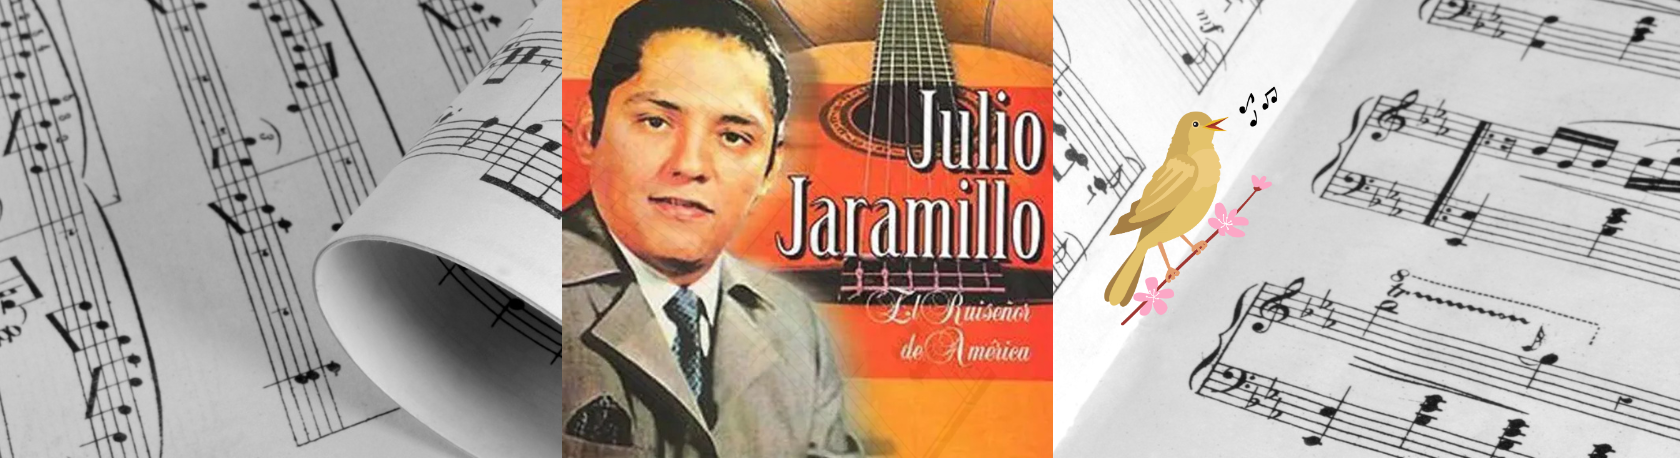 Practice your Spanish Comprehension while listening to the interesting life of JULIO JARAMILLO, the Nightingale of the Americas